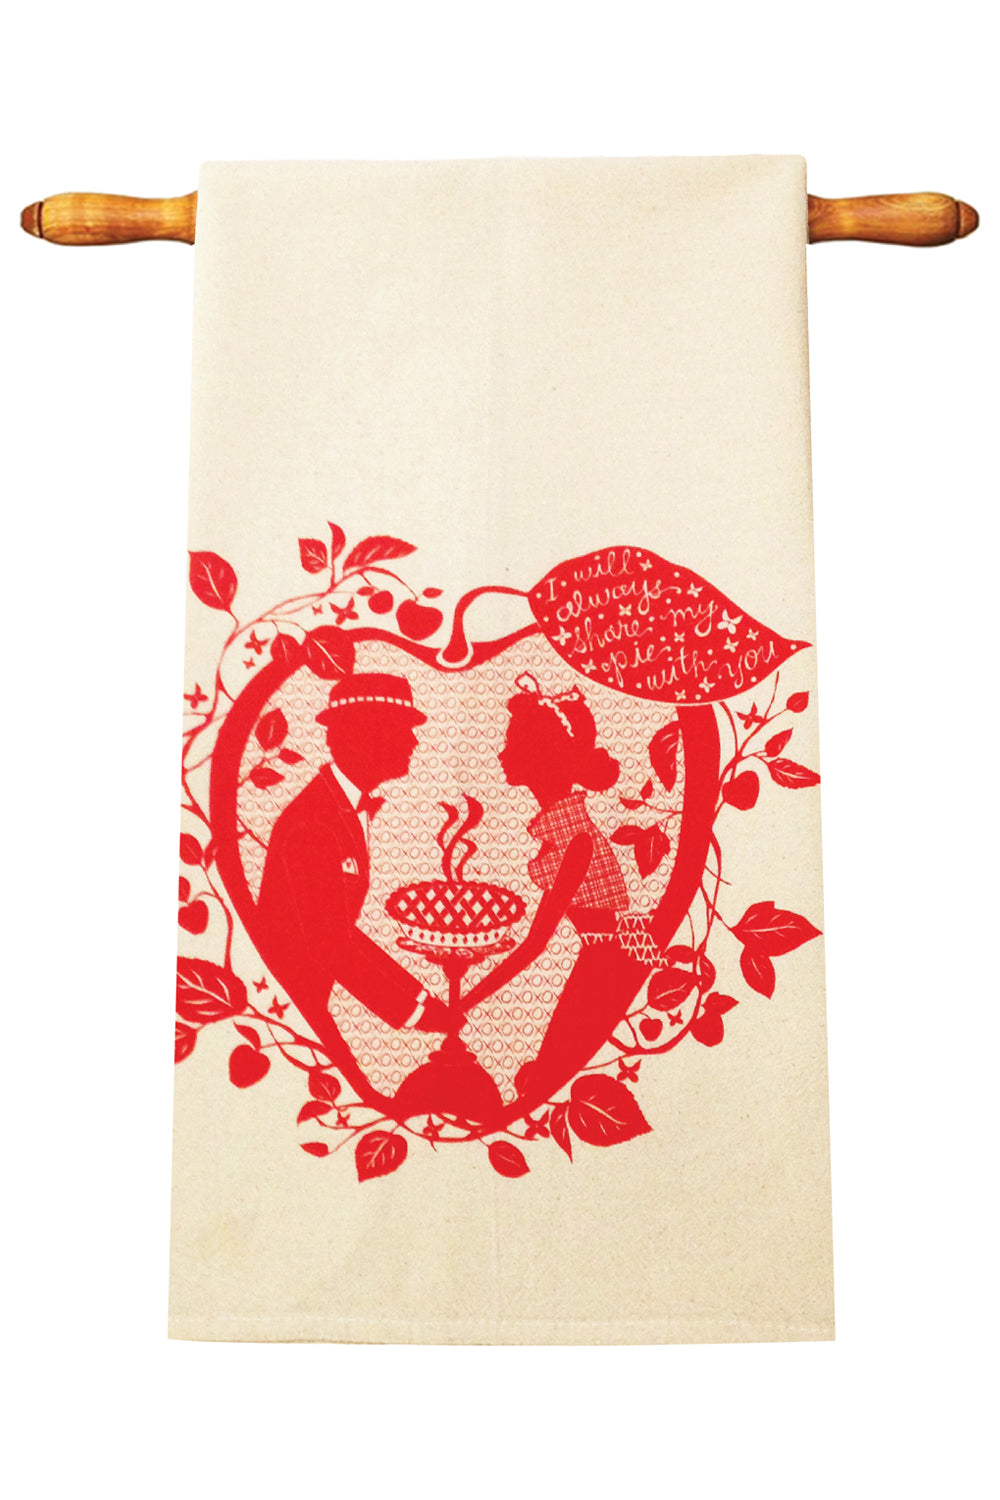 Off white tea towel with red graphic of couple and pie and "I Will Always Share My Pie with You" in a leaf